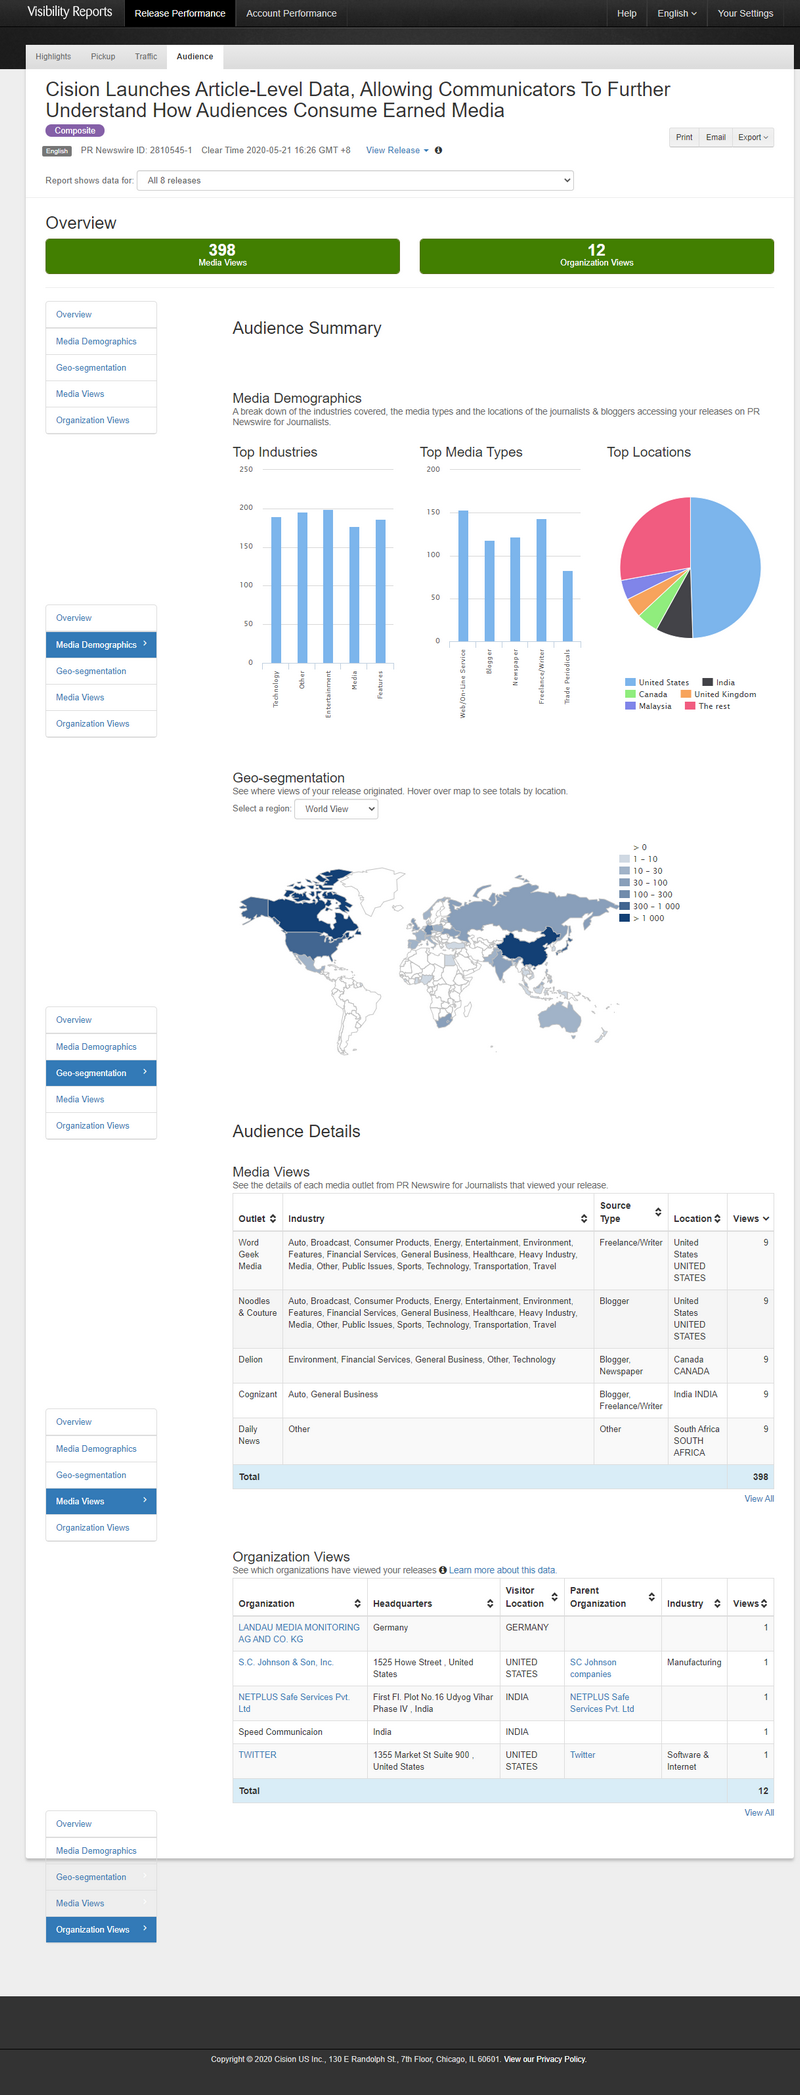 Audience page - Visibility Reports